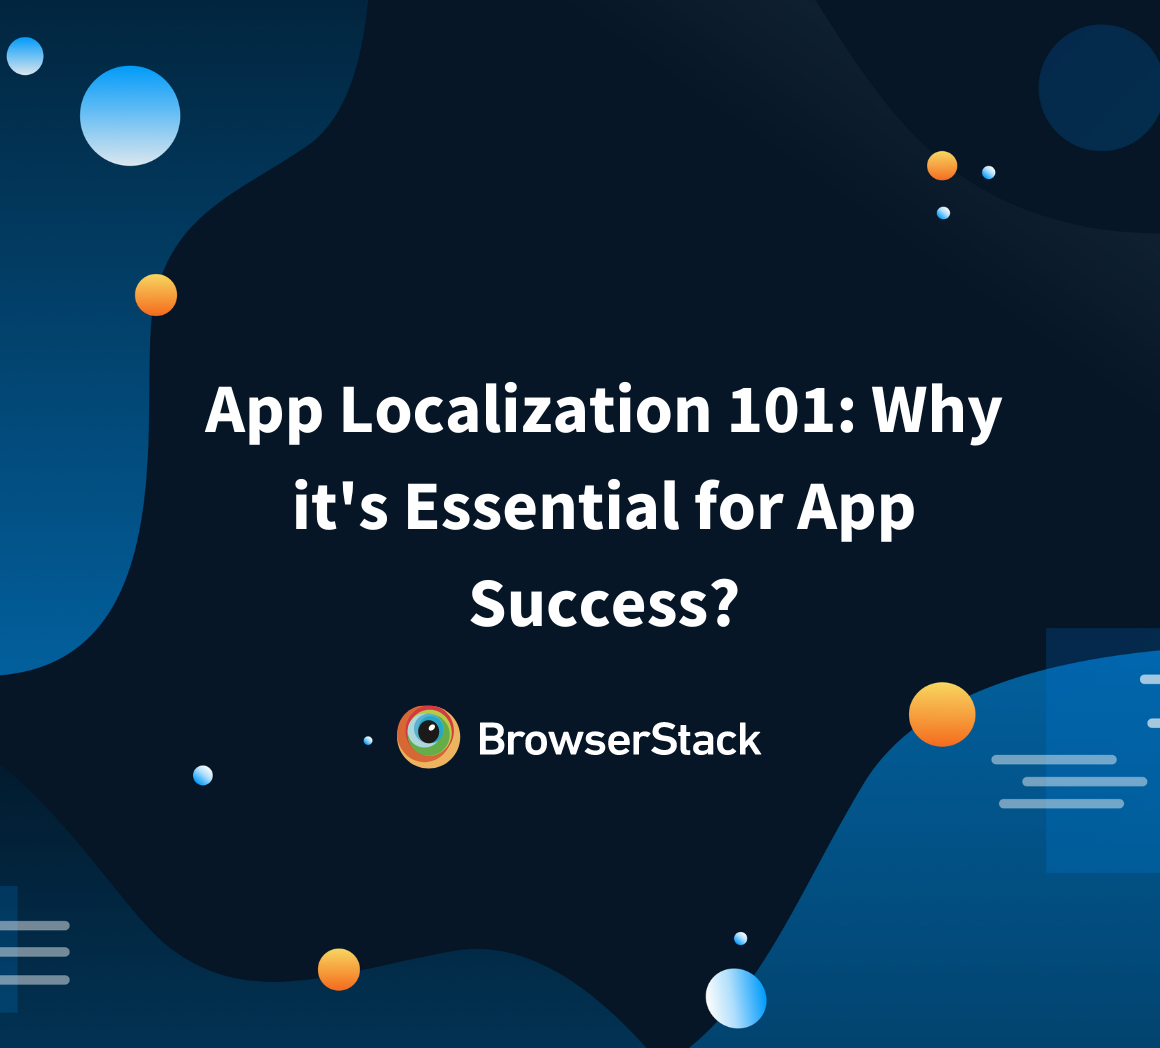 App Store Optimization and Localization: How to Succeed